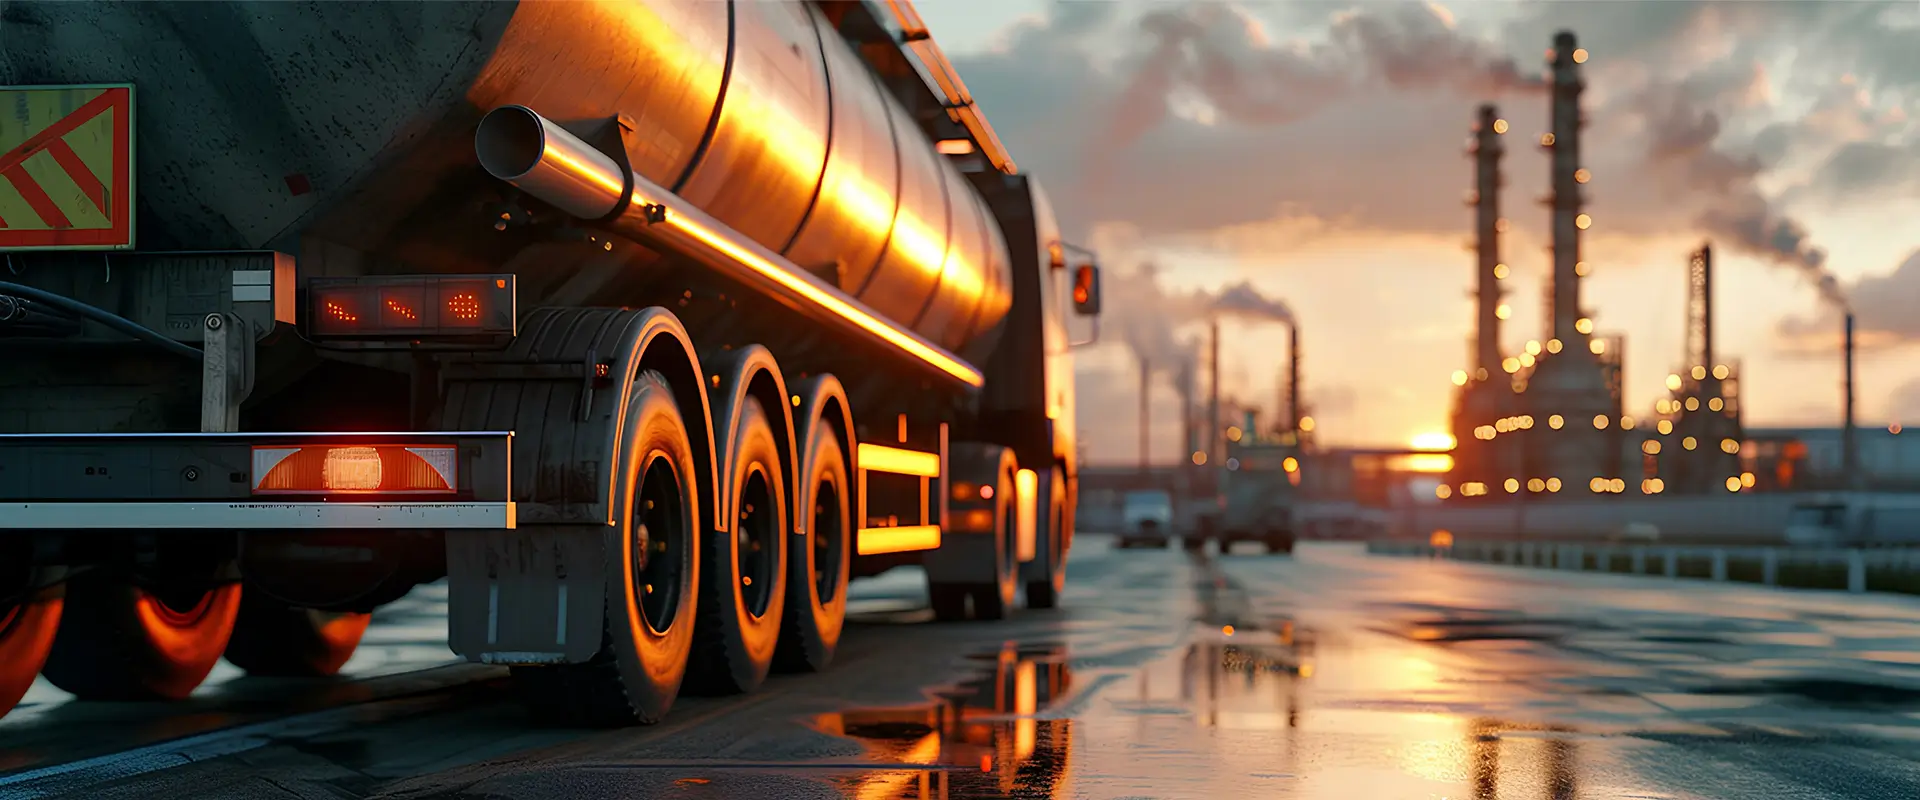 Transportation of oil and natural gas by truck in oil refinery factory